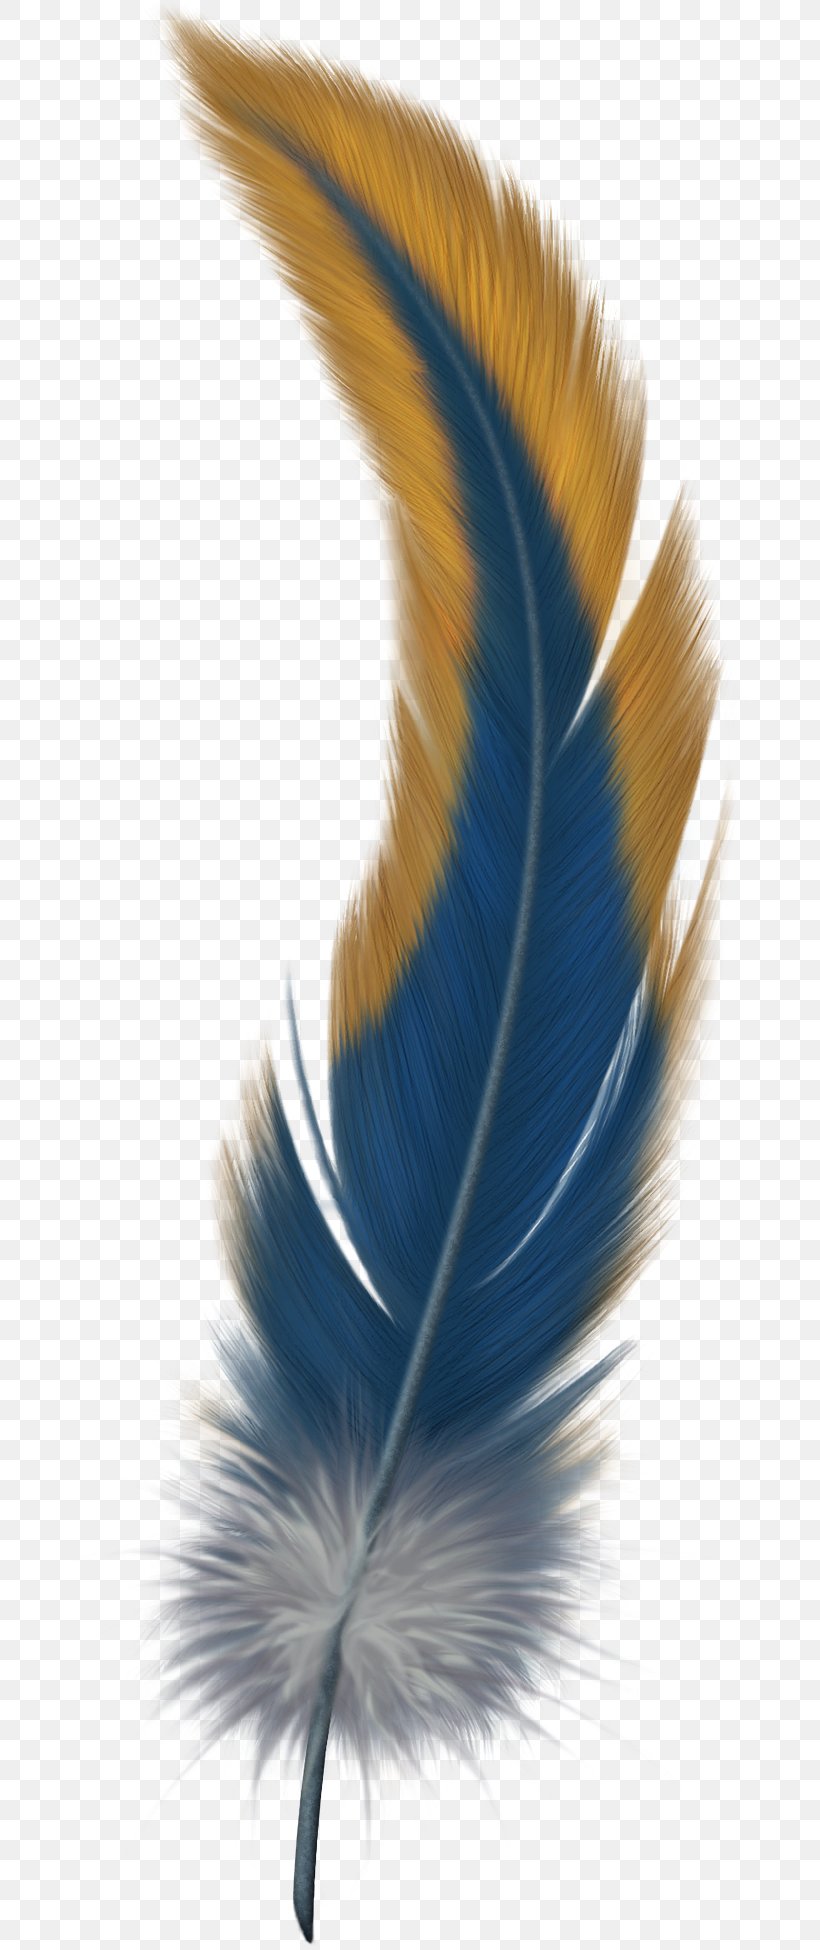 Bird Feathers: A Guide To North American Species Bird Feathers: A Guide To North American Species Bird-of-paradise Flight Feather, PNG, 674x1950px, Bird, Color, Feather, Flight Feather, Peafowl Download Free